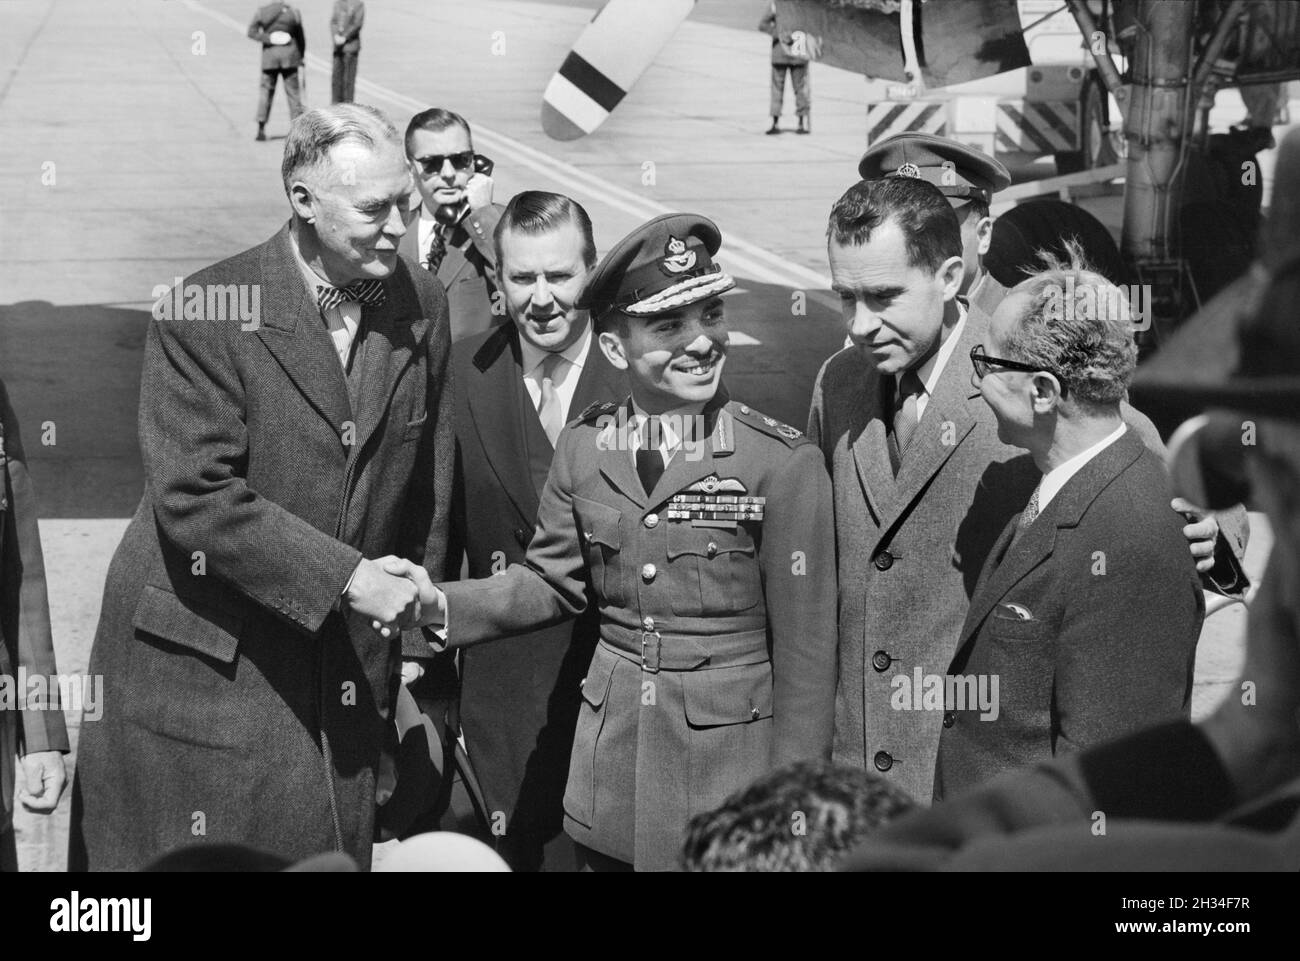 King Hussein of Jordan, with Vice President Richard Nixon and others, on his arrival for an unofficial visit to the United States, National Airport, Arlington, Virginia, USA, Marion S. Trikosko, US News & World Report Magazine Collection, March 19, 1959 Stock Photo